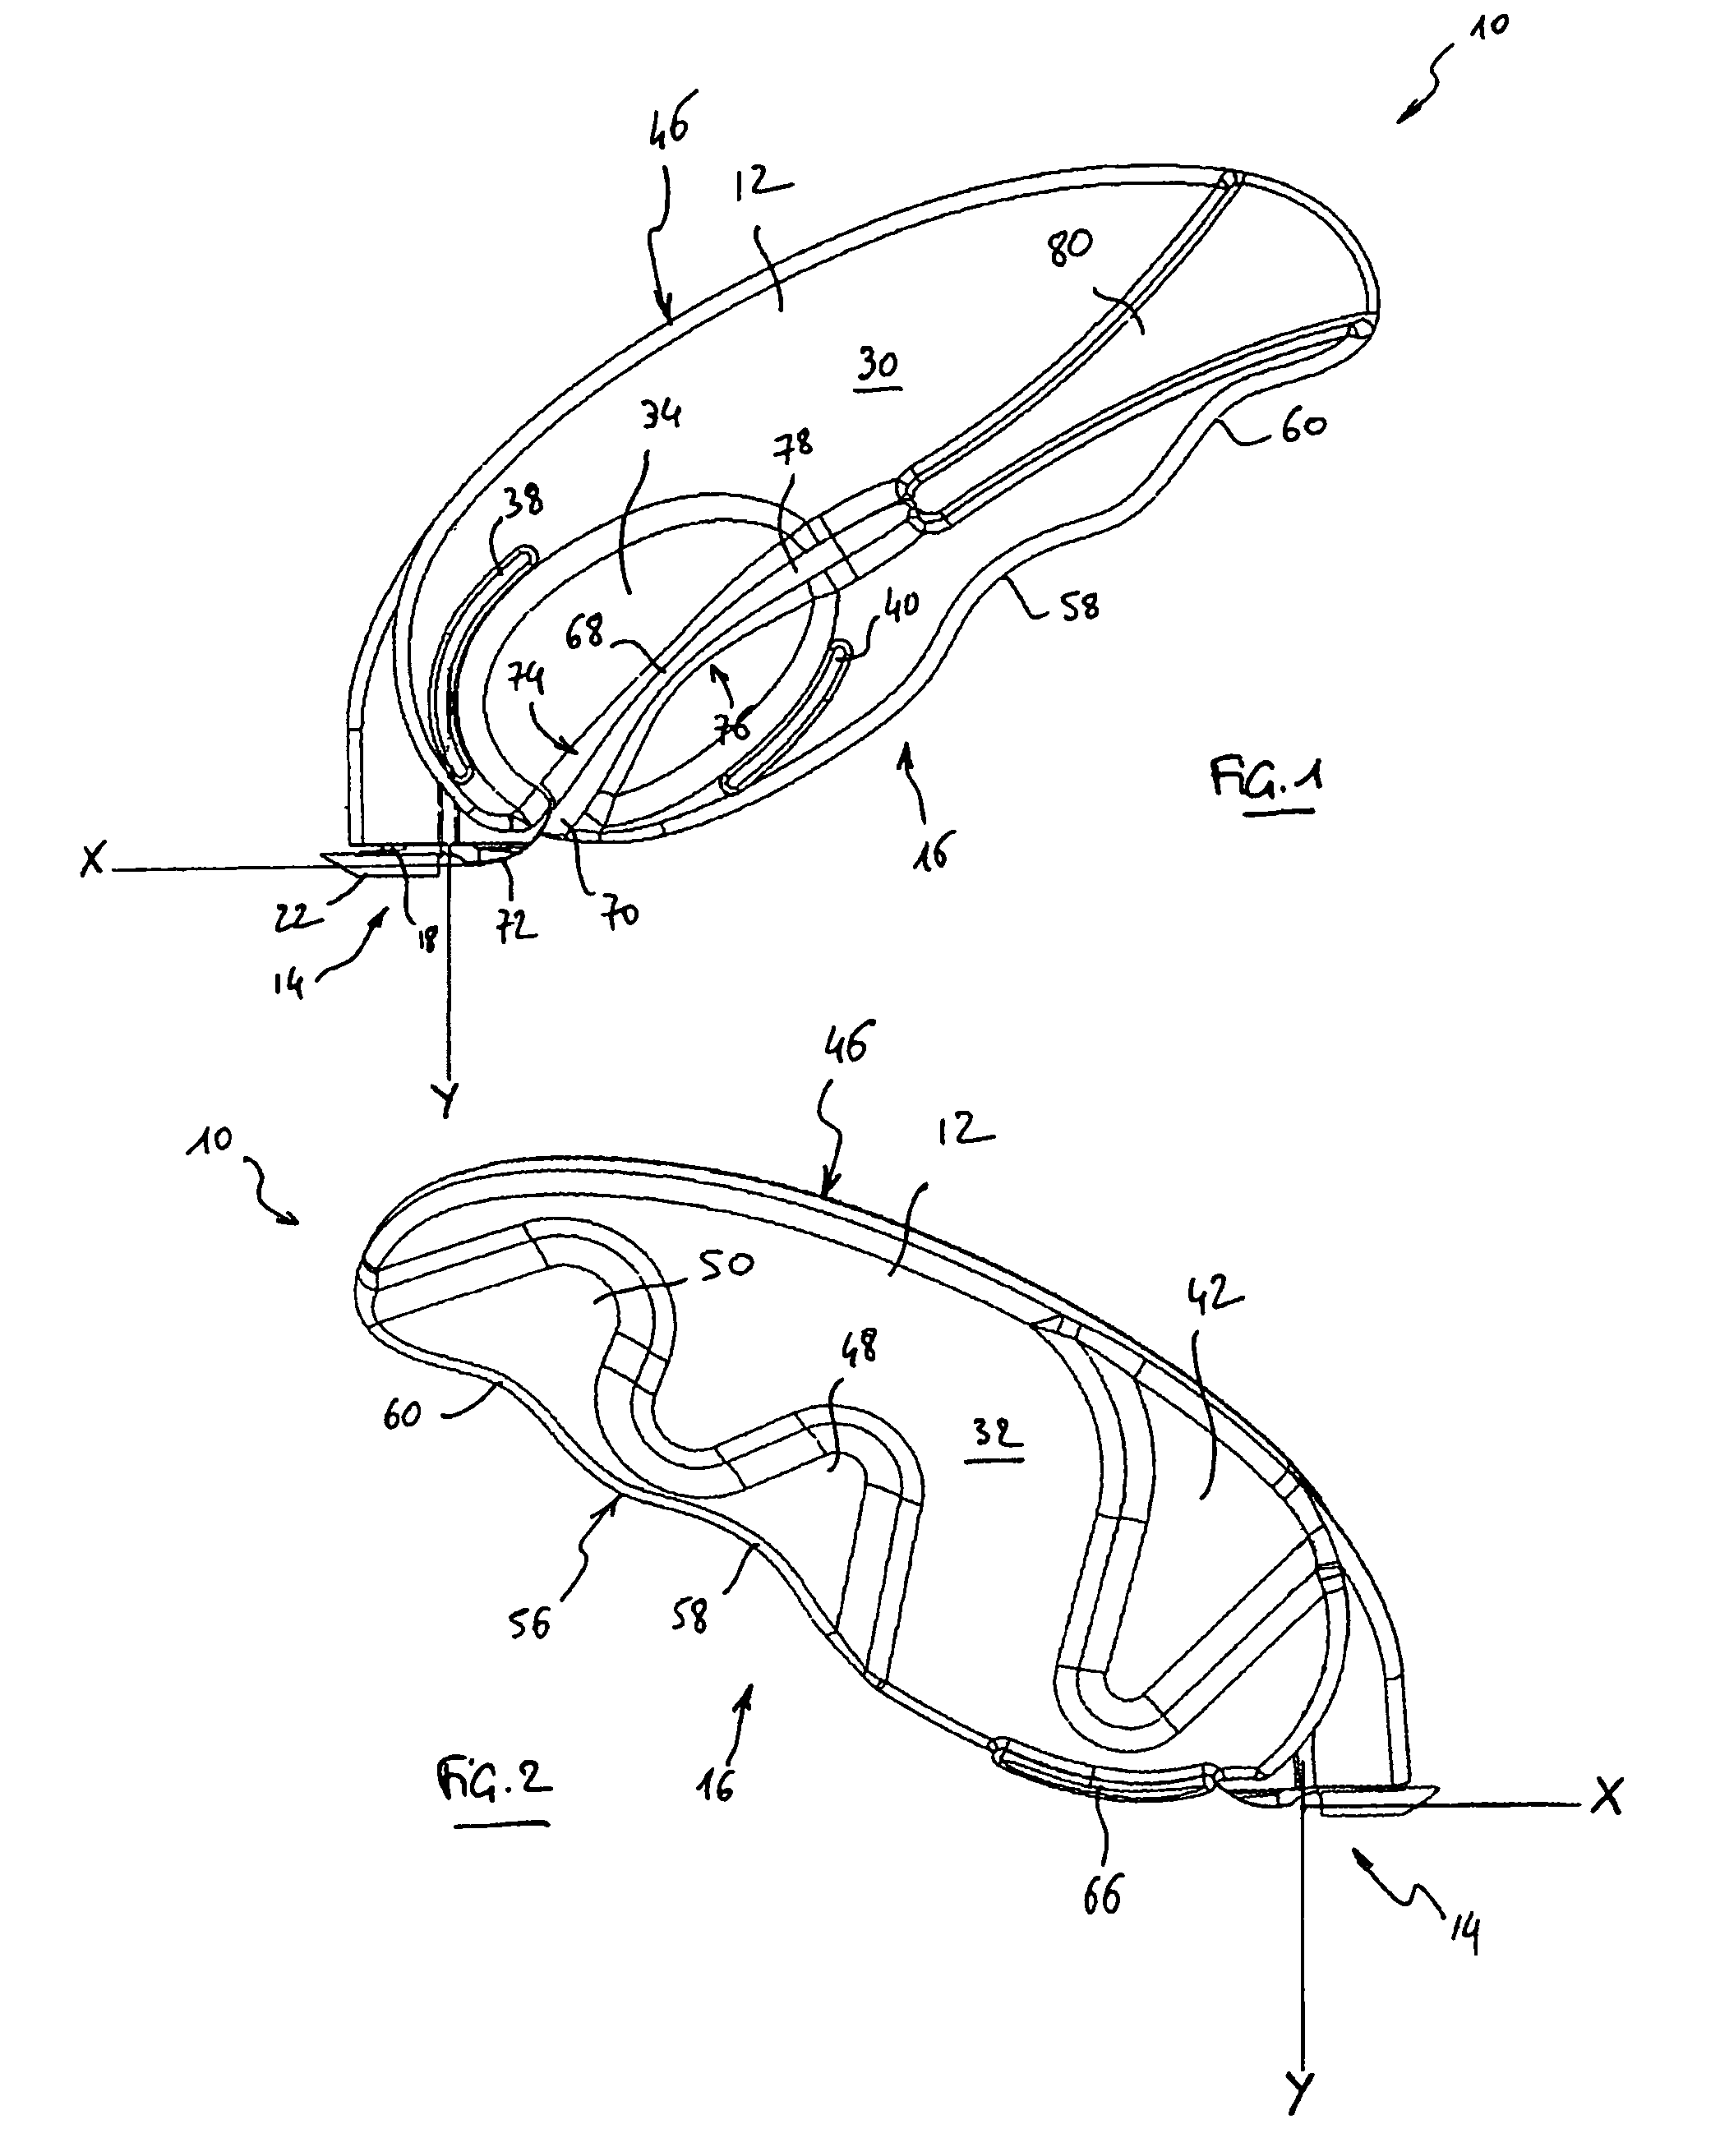 Slitter tool for cutting a tubular sheath of a guide catheter